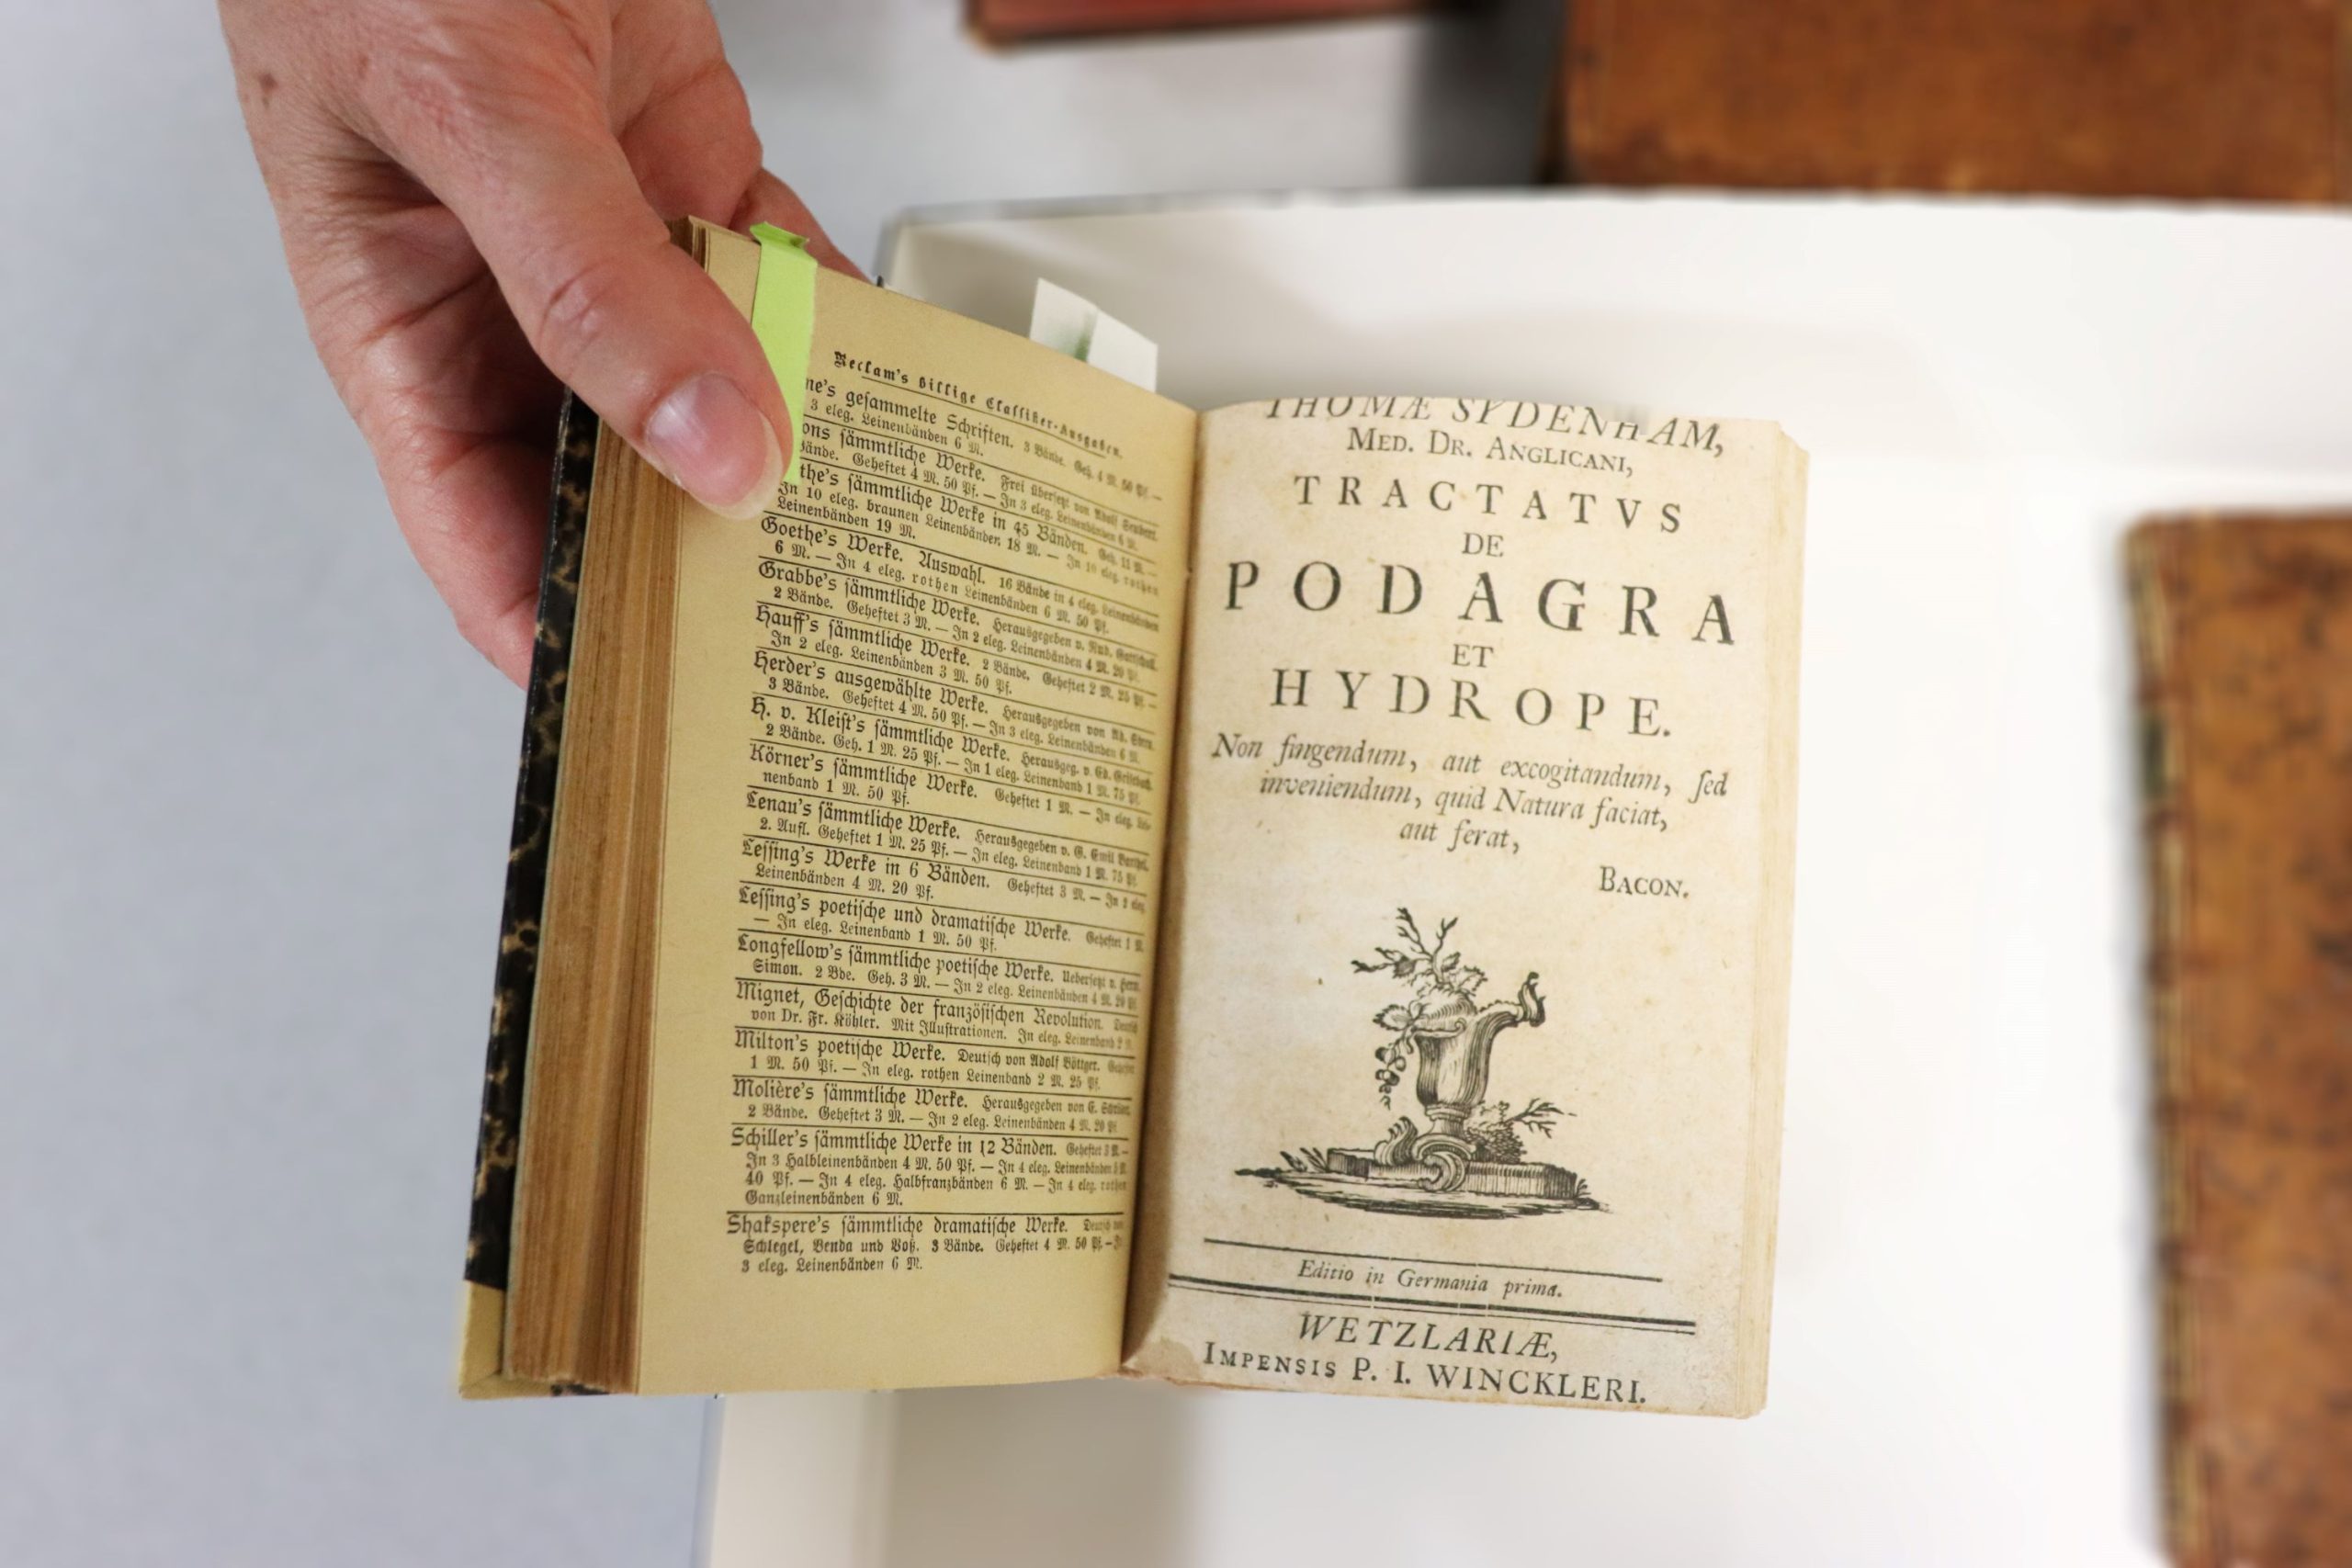 An old book is held open to the cover page of Tractatus de Podagra et Hydrope.